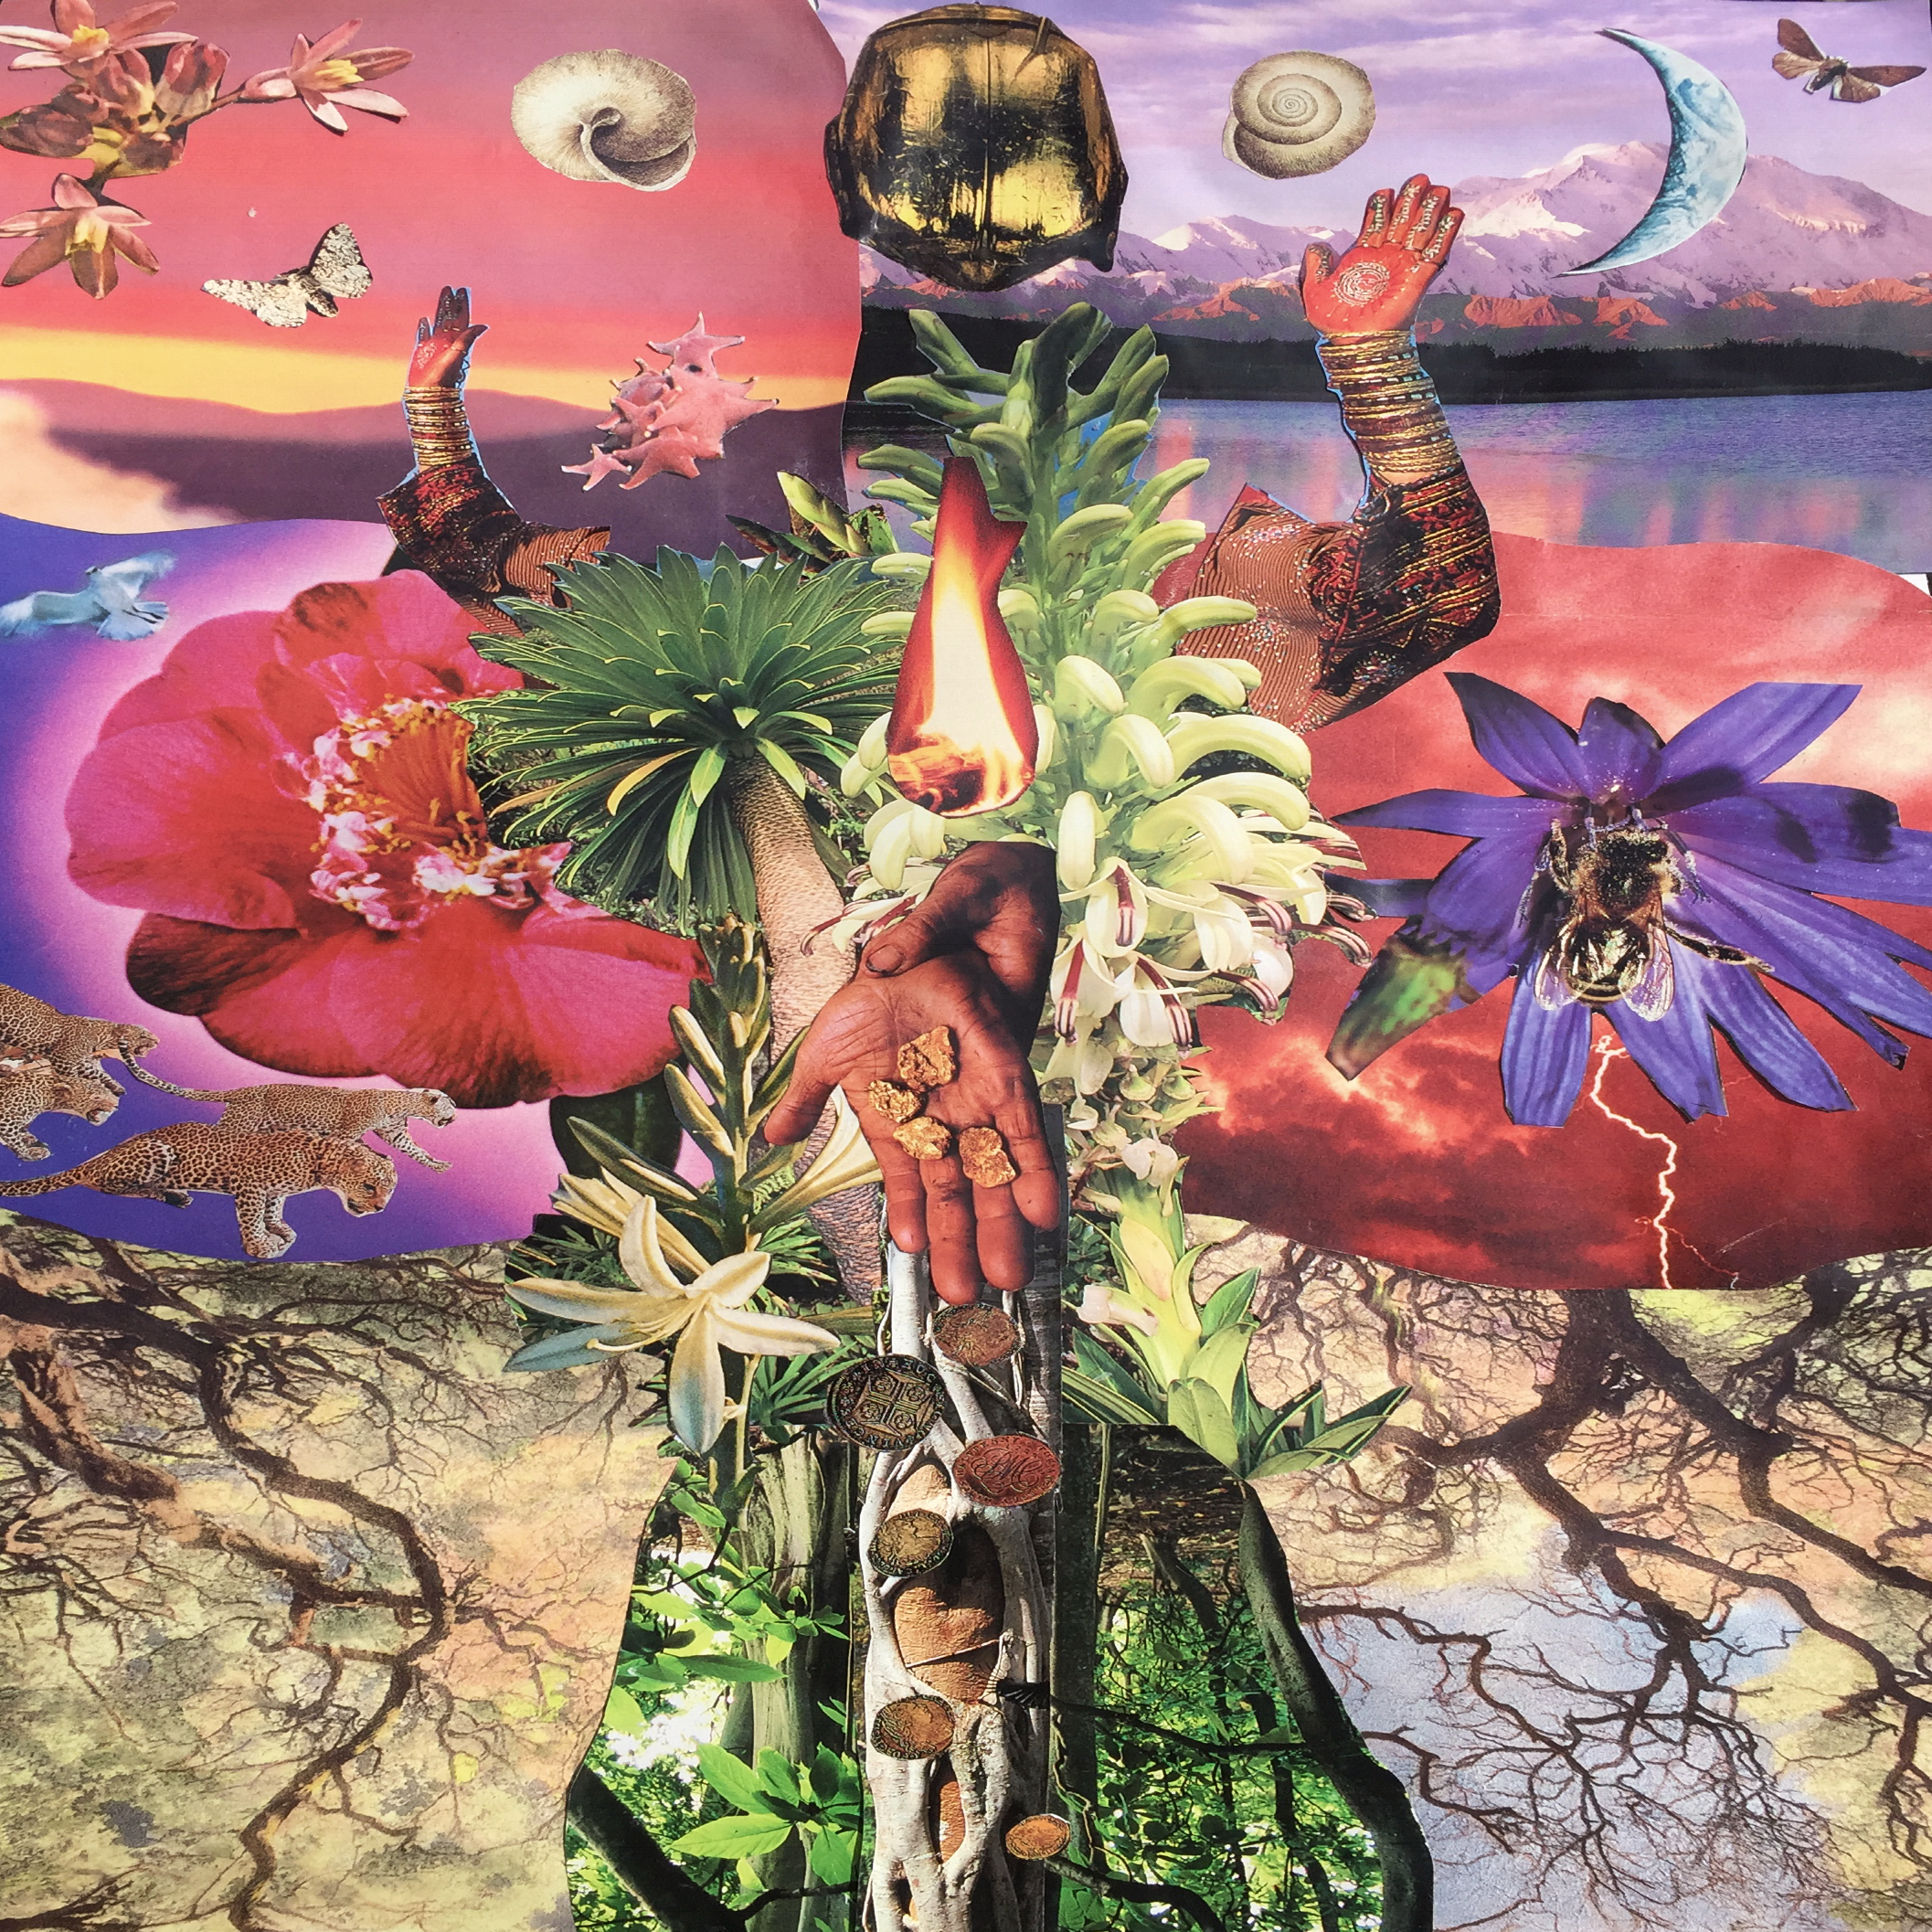 Image Description: Artwork for the song created by NKODIA. A collage of a humanoid with palms to the sky in prayer and a body made of trees, flowers and seeds.